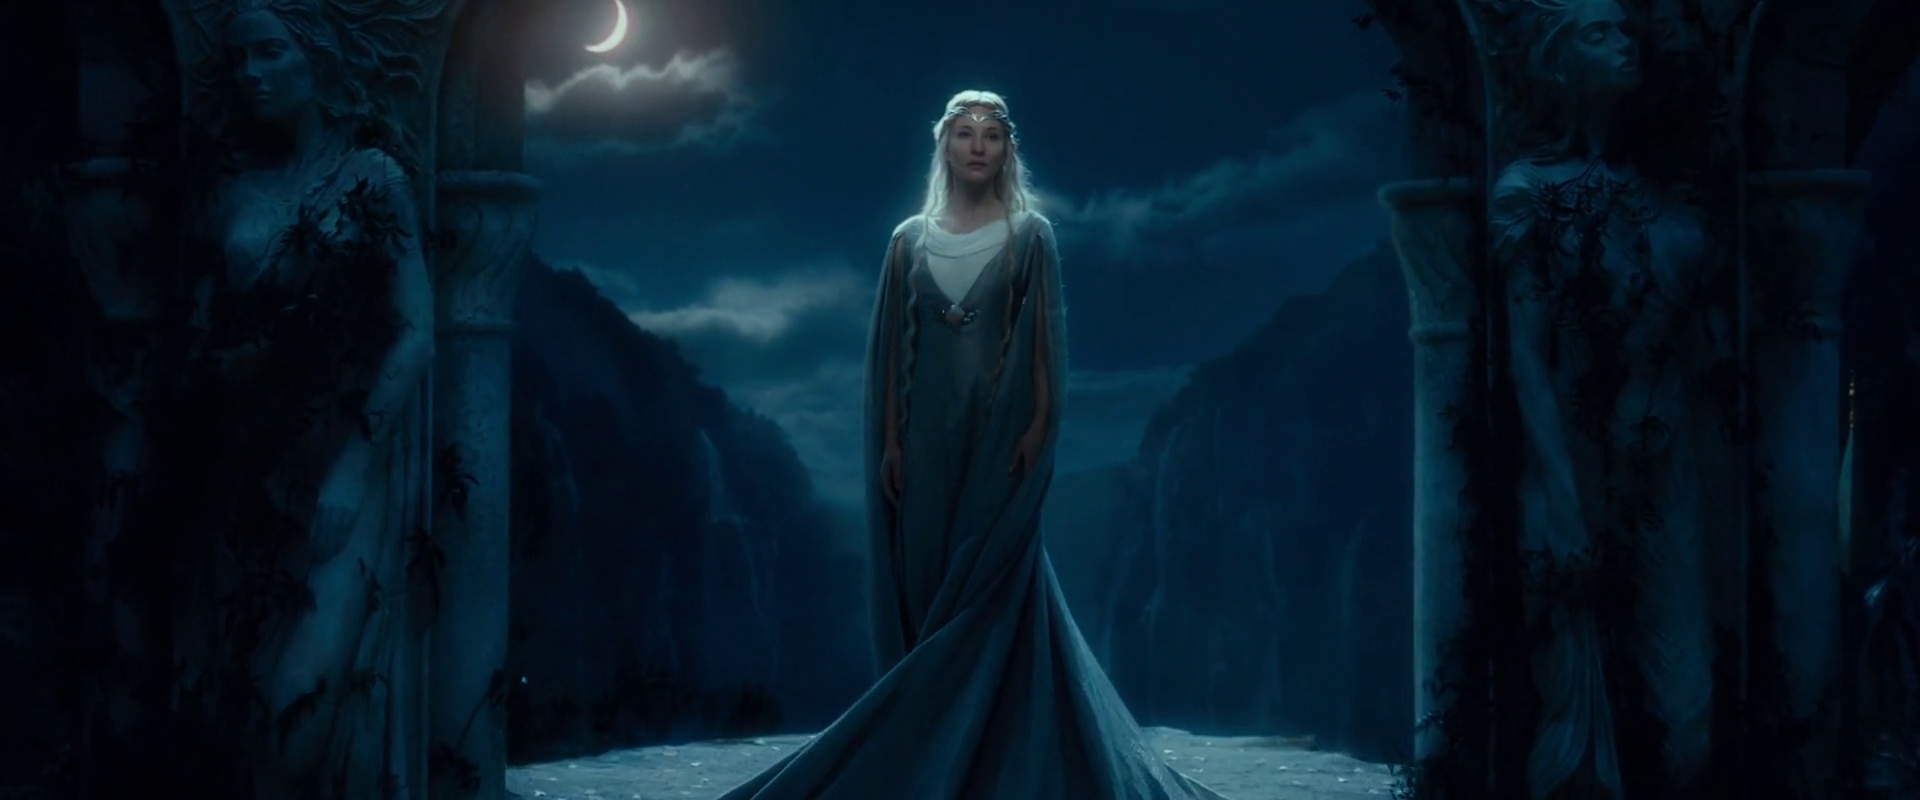 People 1920x800 movies The Lord of the Rings Galadriel film stills Moon actress fantasy girl standing Cate Blanchett women